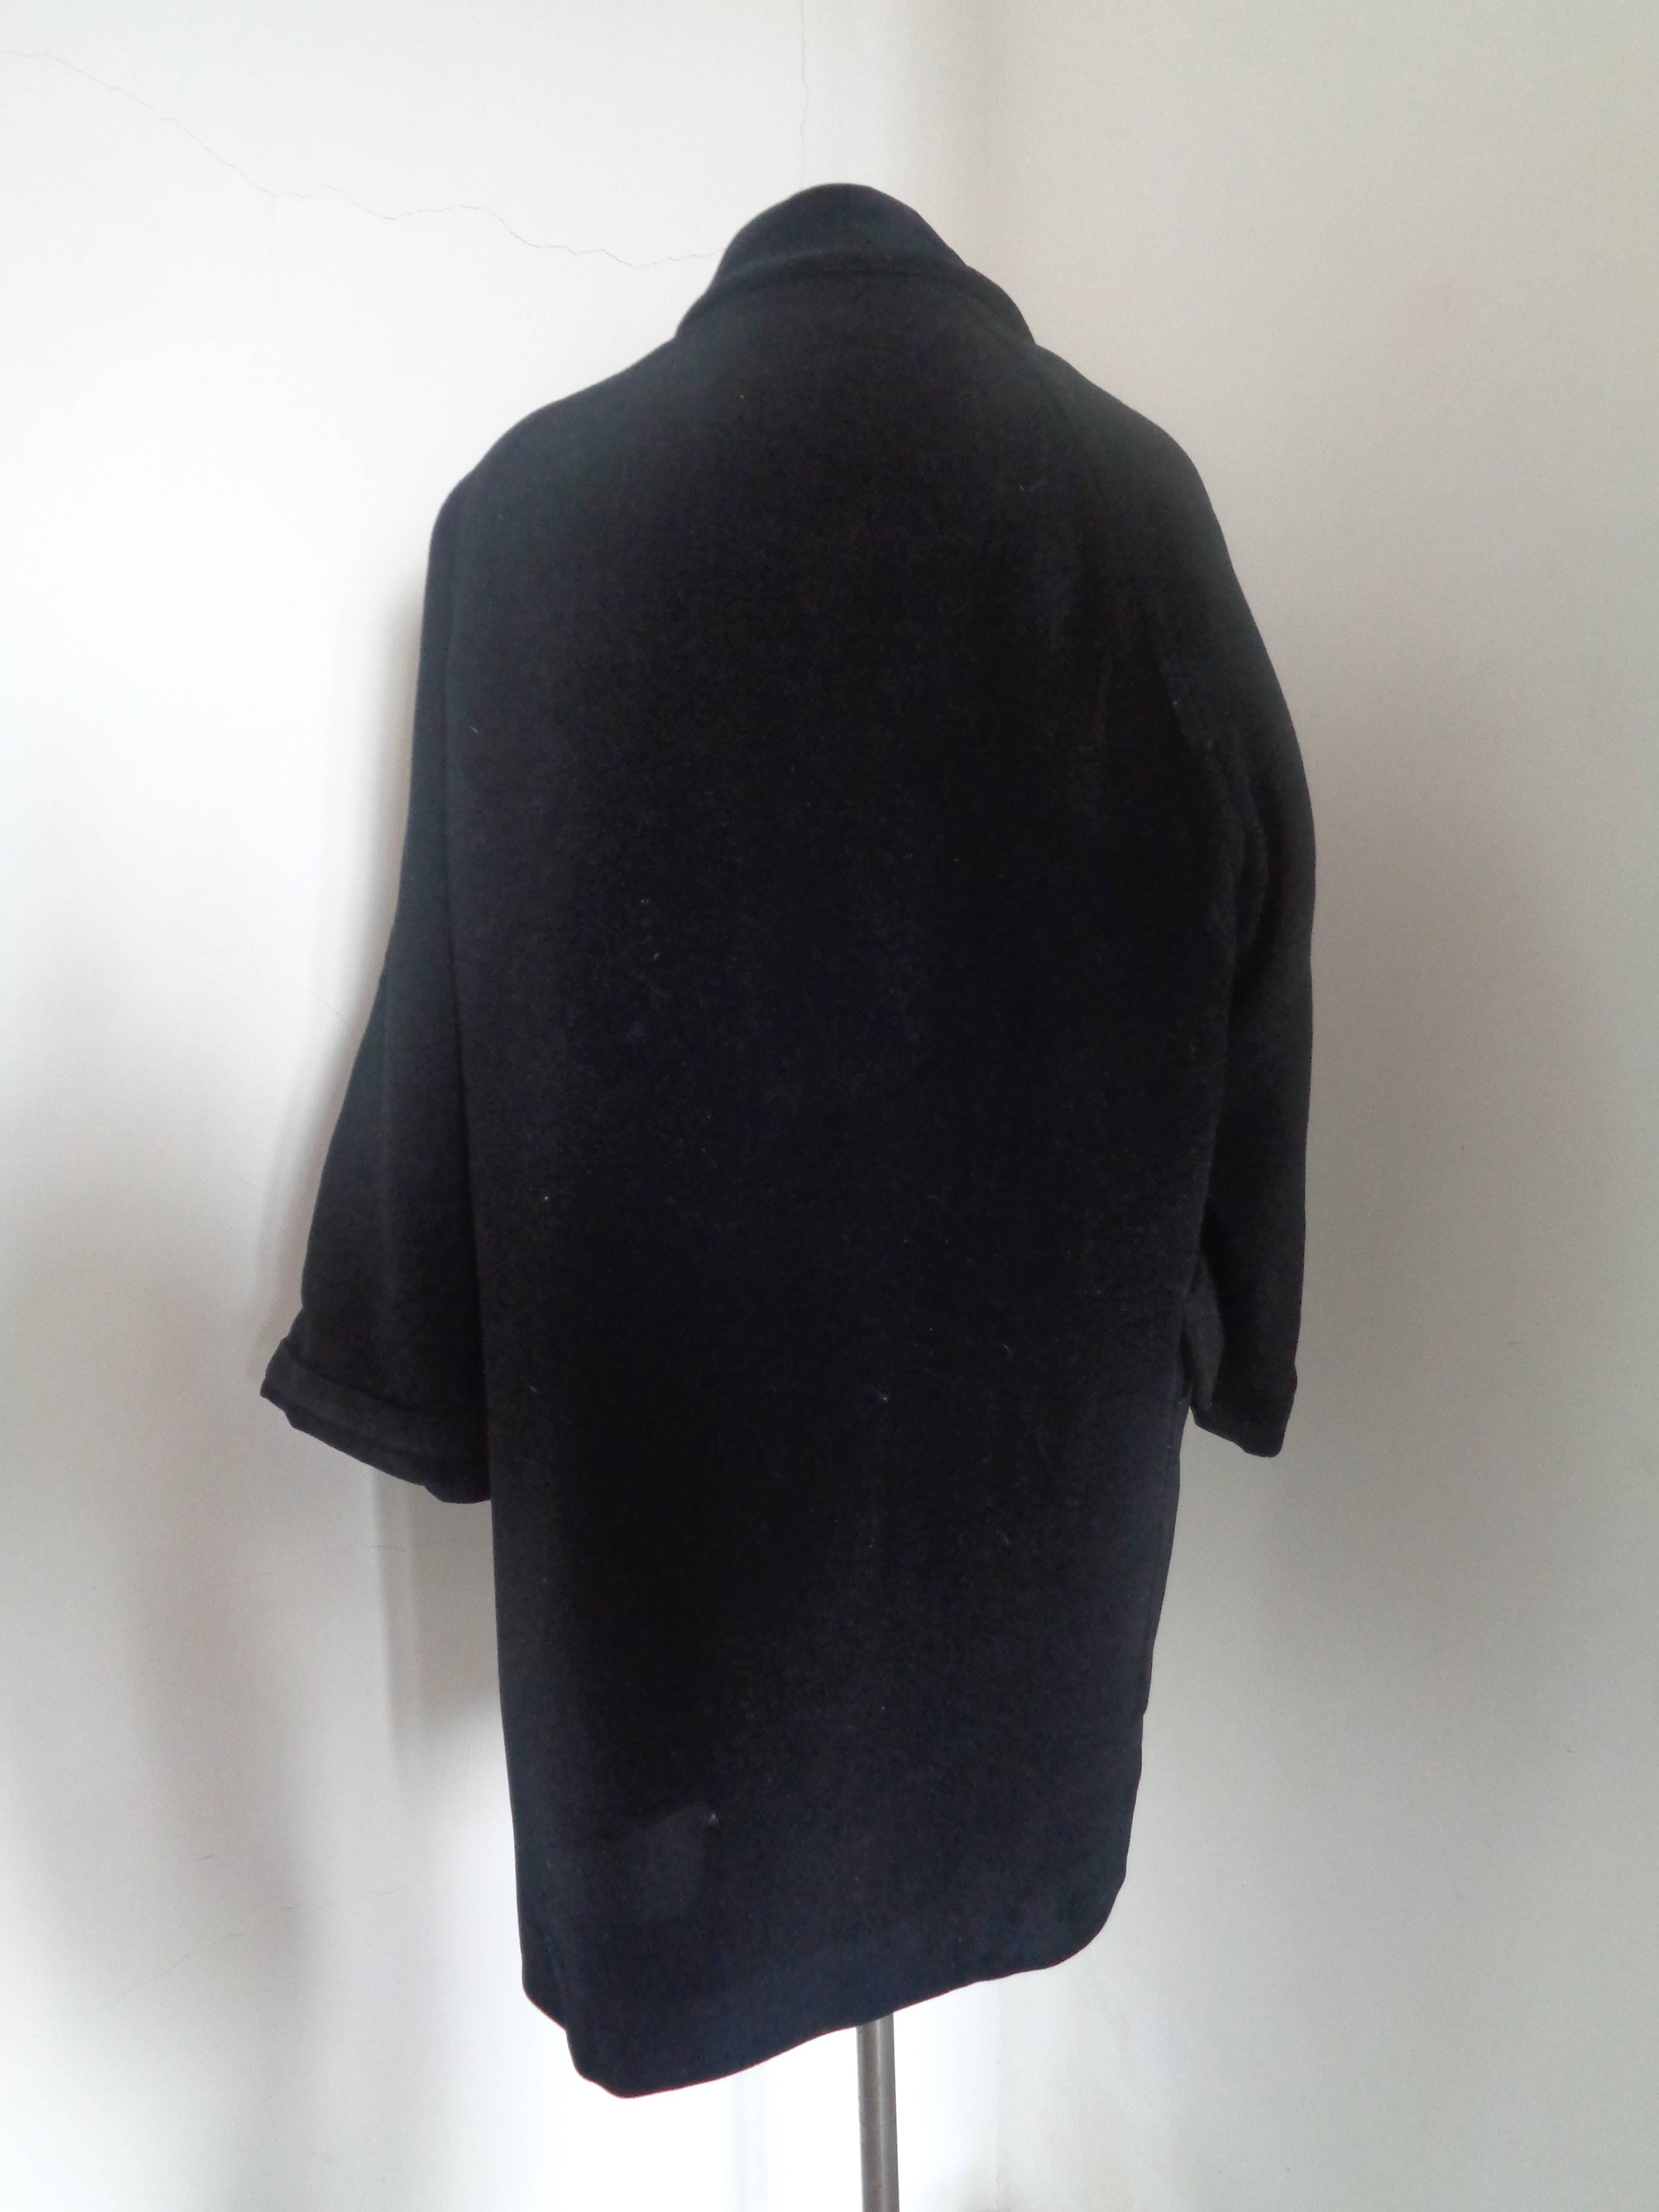 Moschino Cheap & Chic Black Wool Coat

Totally made in italy in italian size range 42

Composition: Wool and other